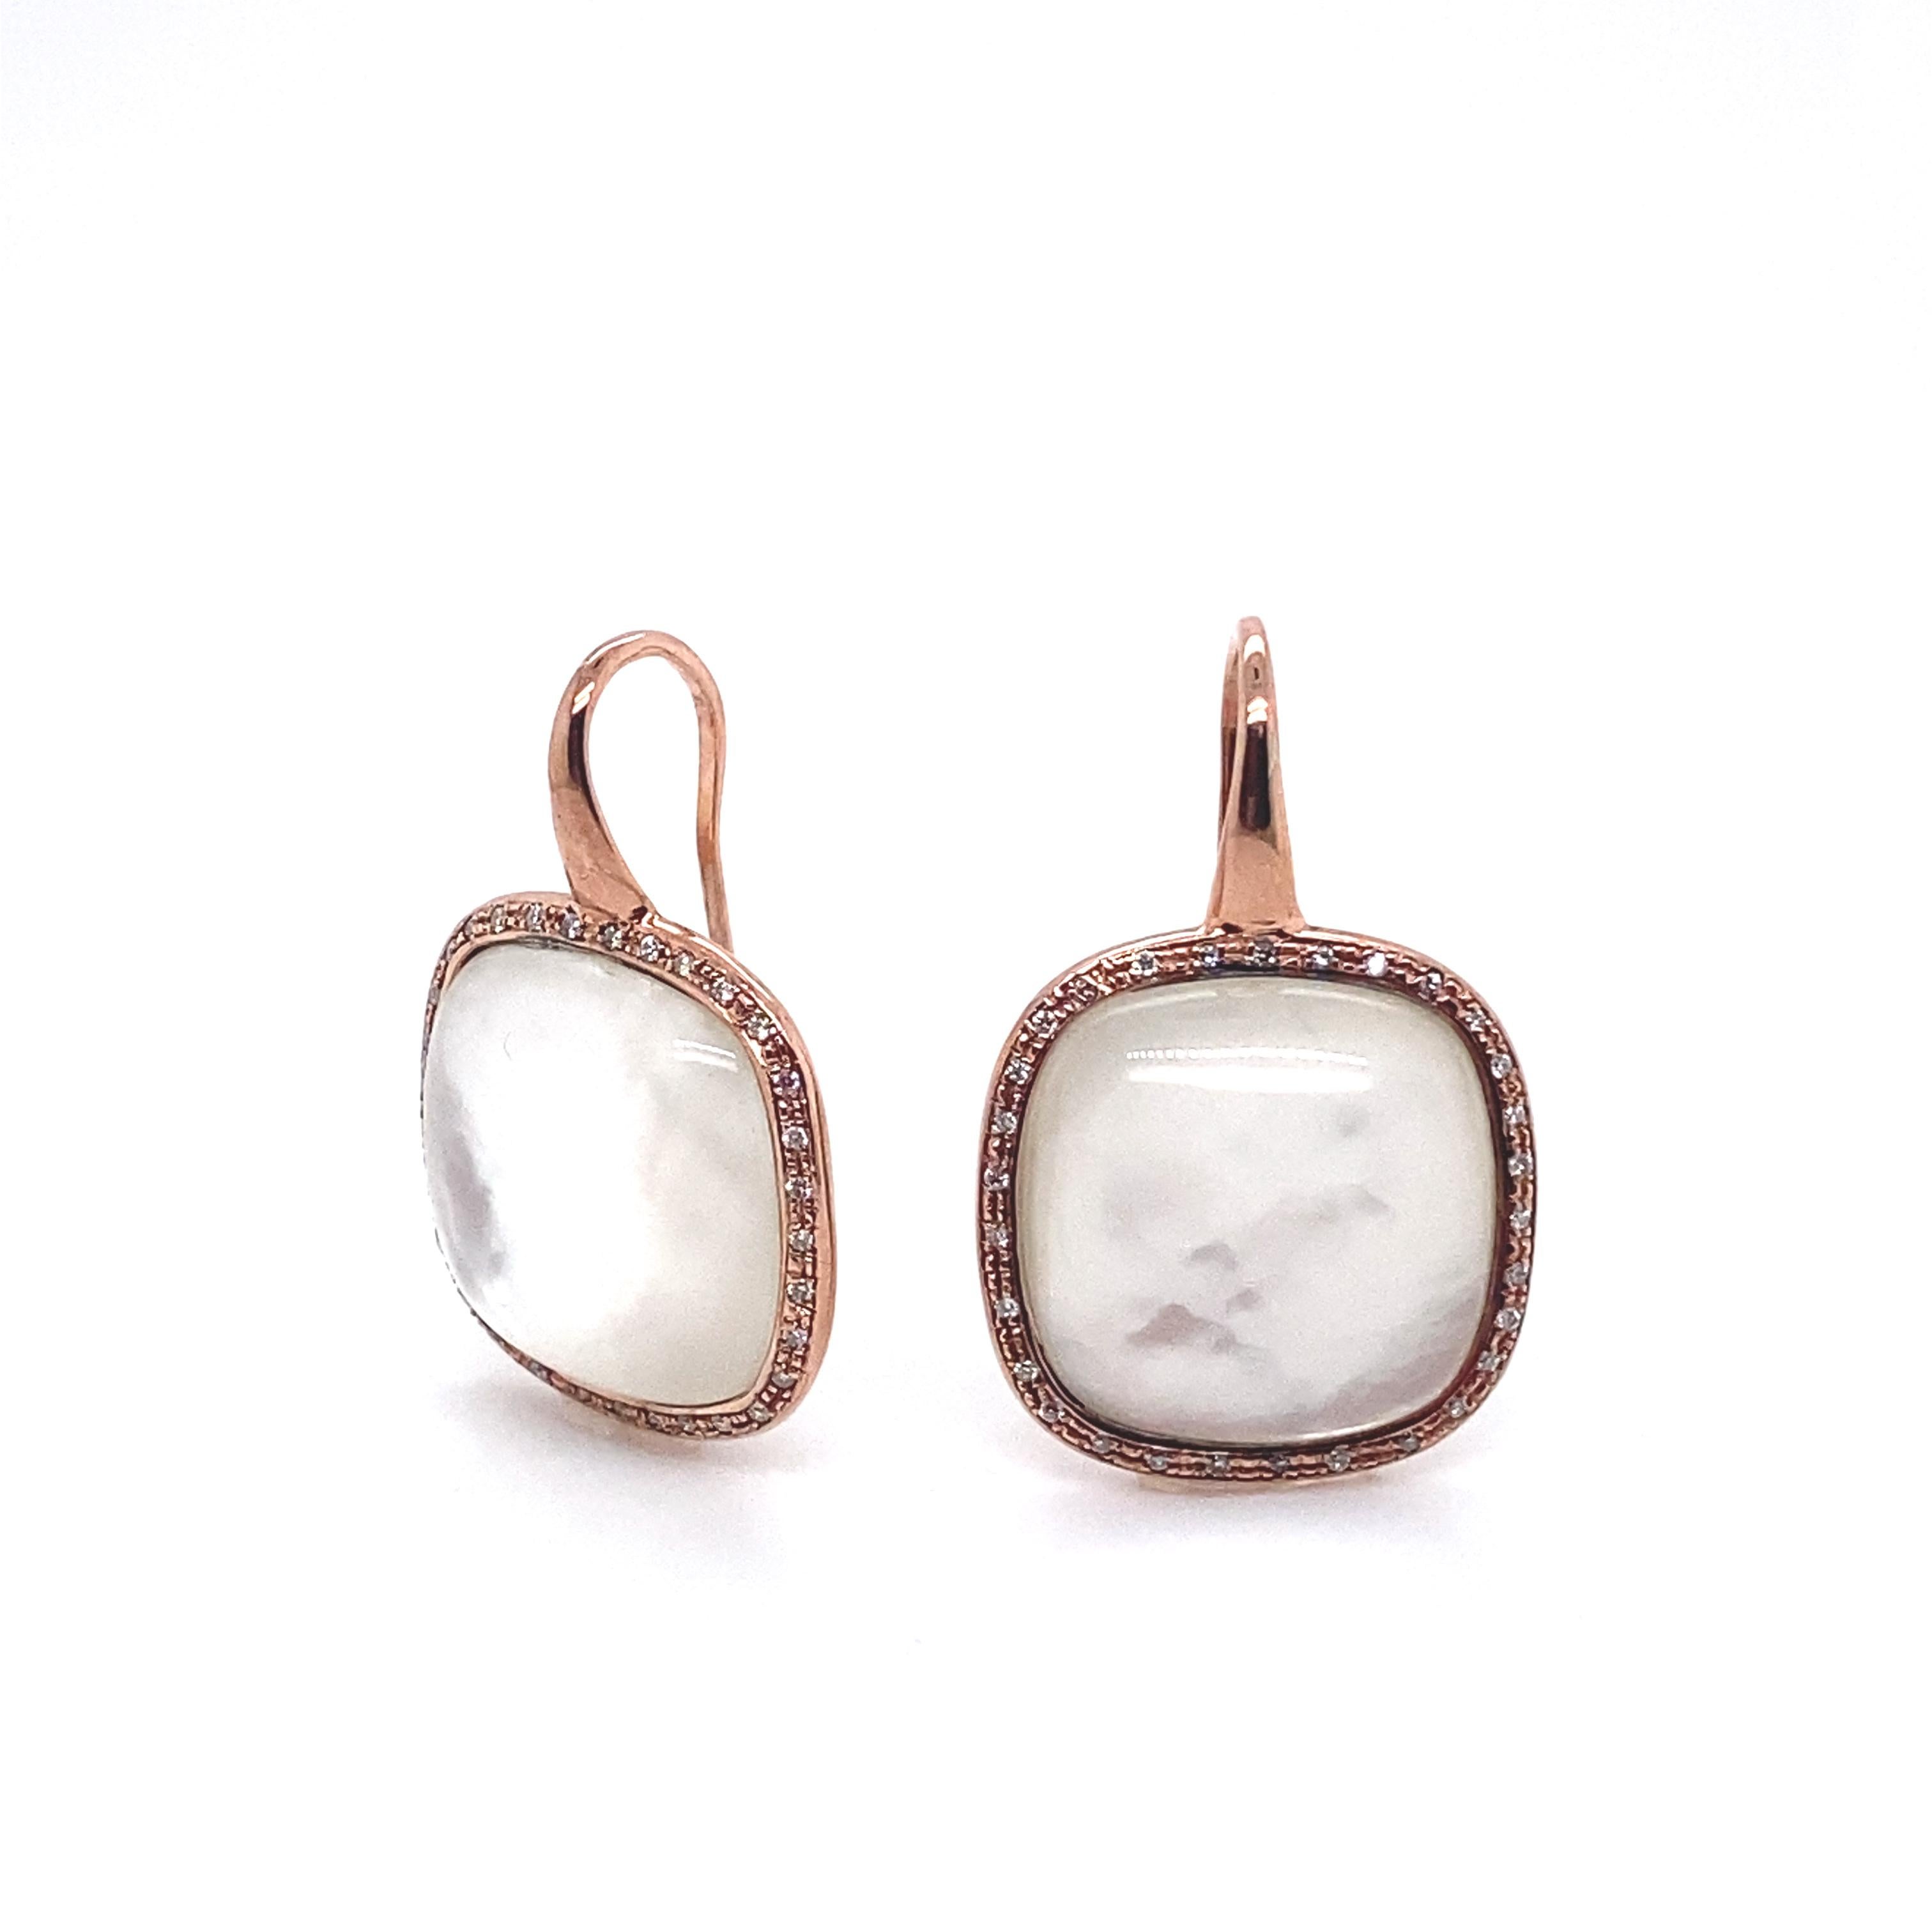 Women's 18 Carat Pink Gold Earrings Adorned with a White Quartz Surrounded by Diamonds For Sale